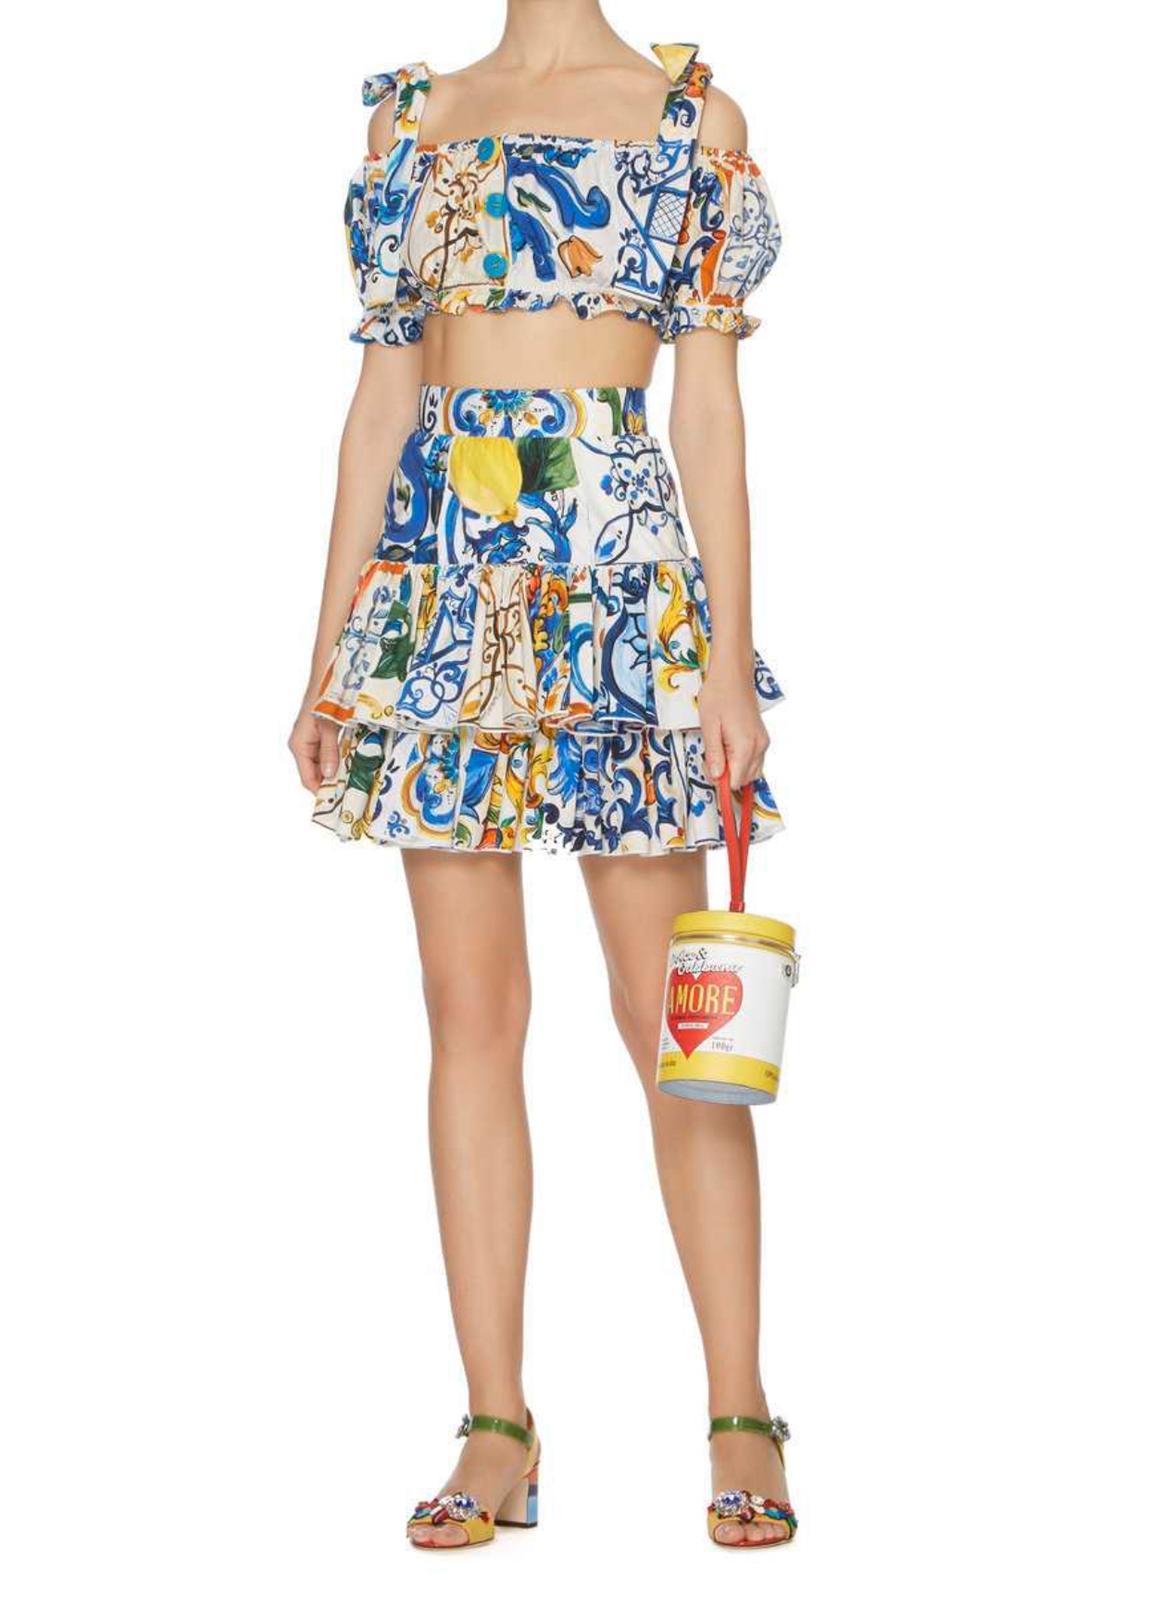 Dolce & Gabbana Sicily Maiolica
printed skirt

Size 44IT would fit to UK12, L.

100% cotton
Brand new with the tags!

Please check the matching cropped top!!

Please check my other DG clothing ,
beachwear, shoes, Sicily bag &
accessories in this